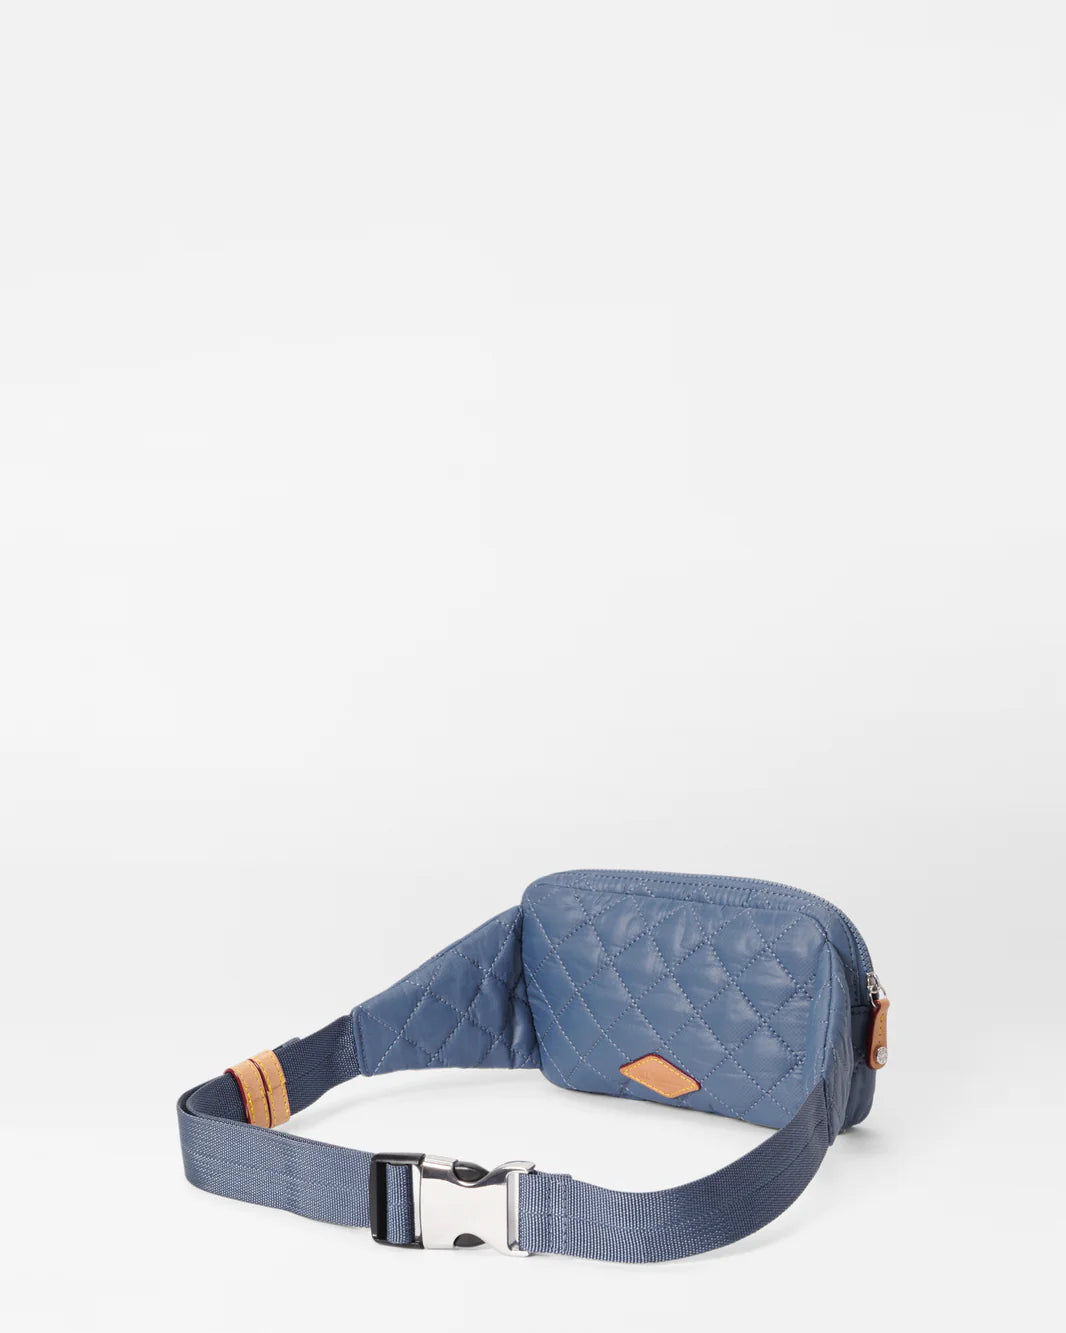 MZ WALLACE METRO BELT BAG IN DENIM – A Step Above Shoes